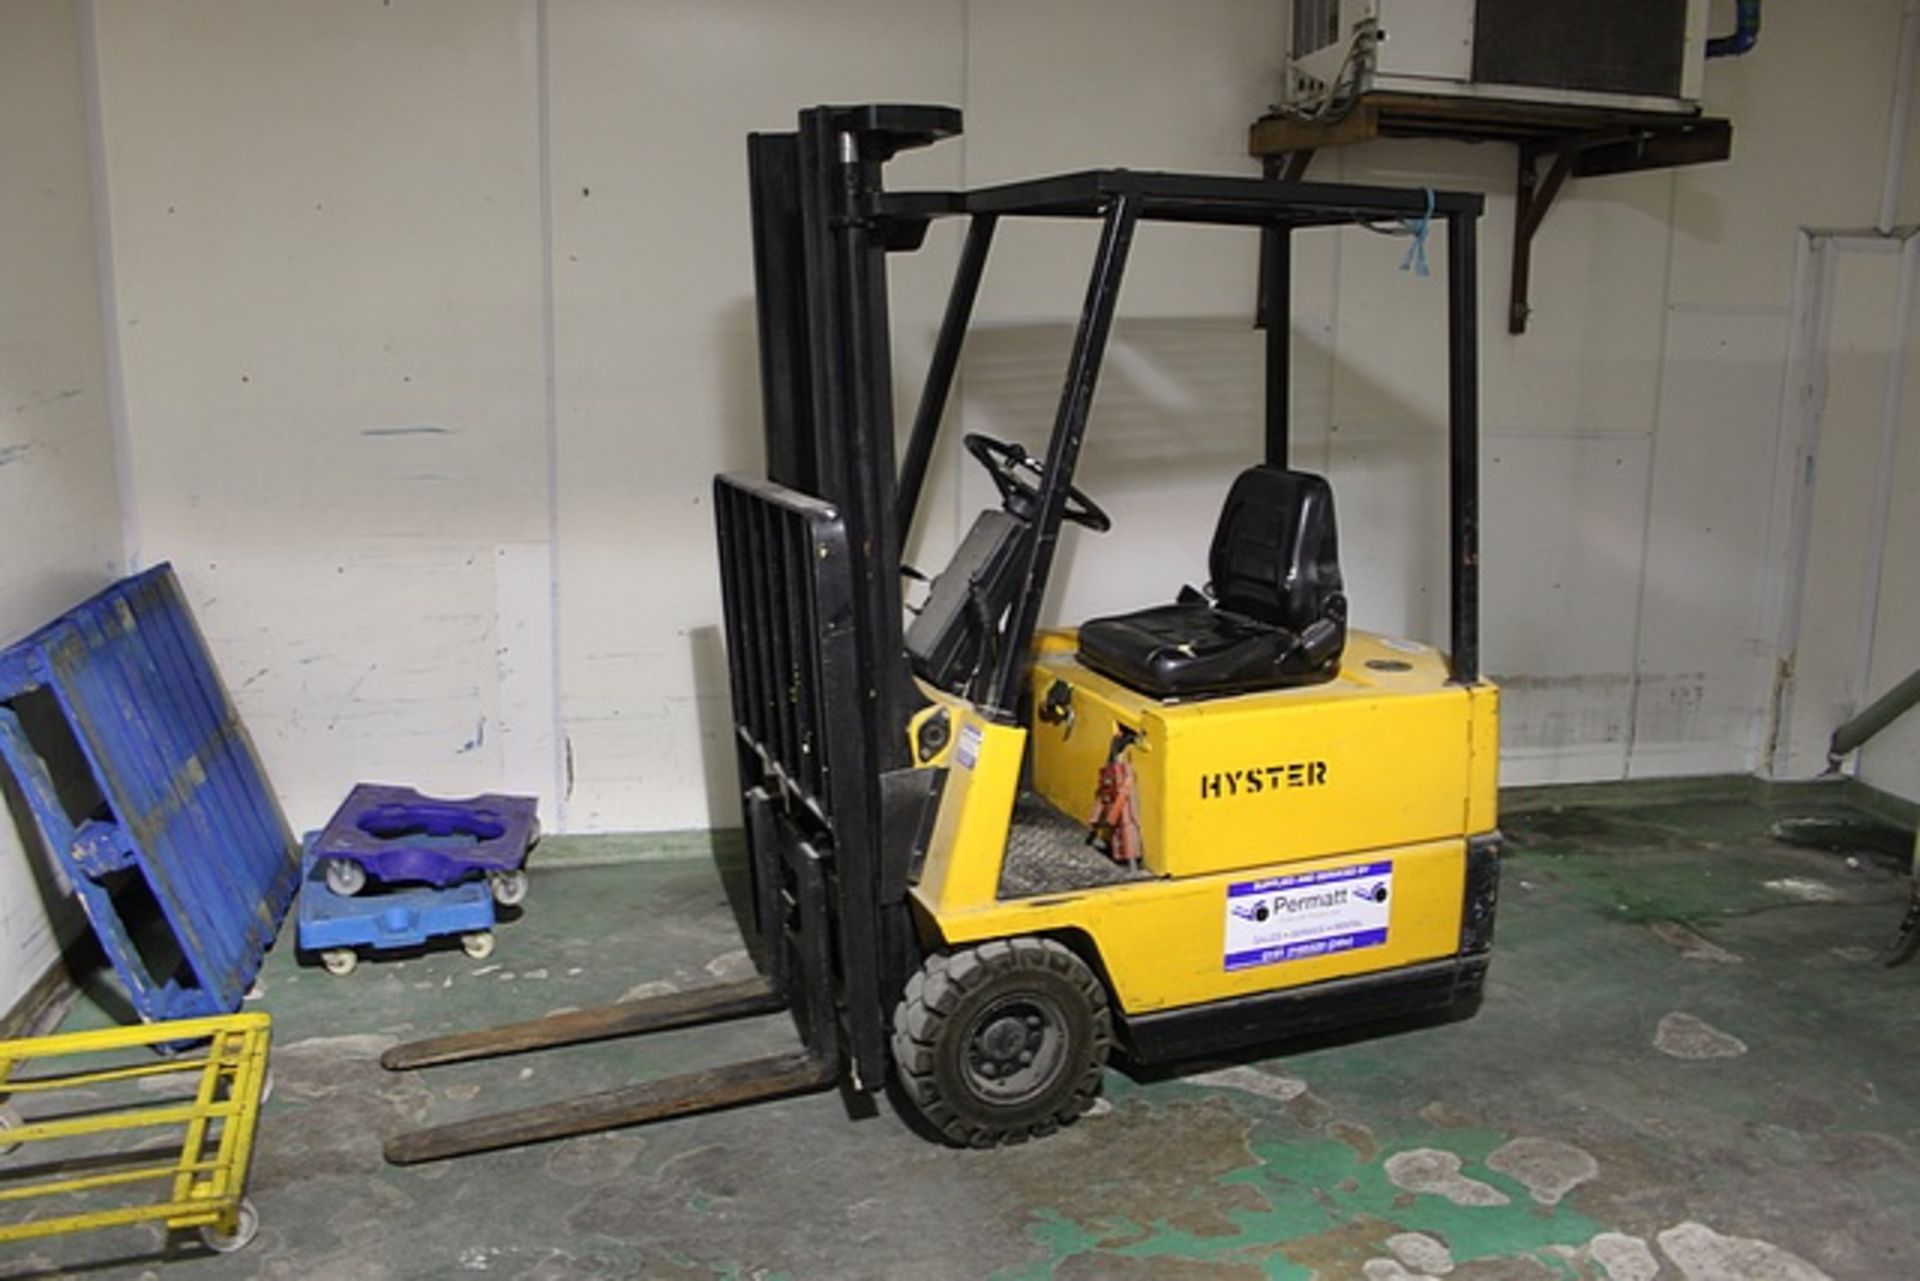 Hyster A150XK 1500KG 4.3M LIFT AZ08026200 CLOSEDHEIGHT 2670MM electric - Image 5 of 7